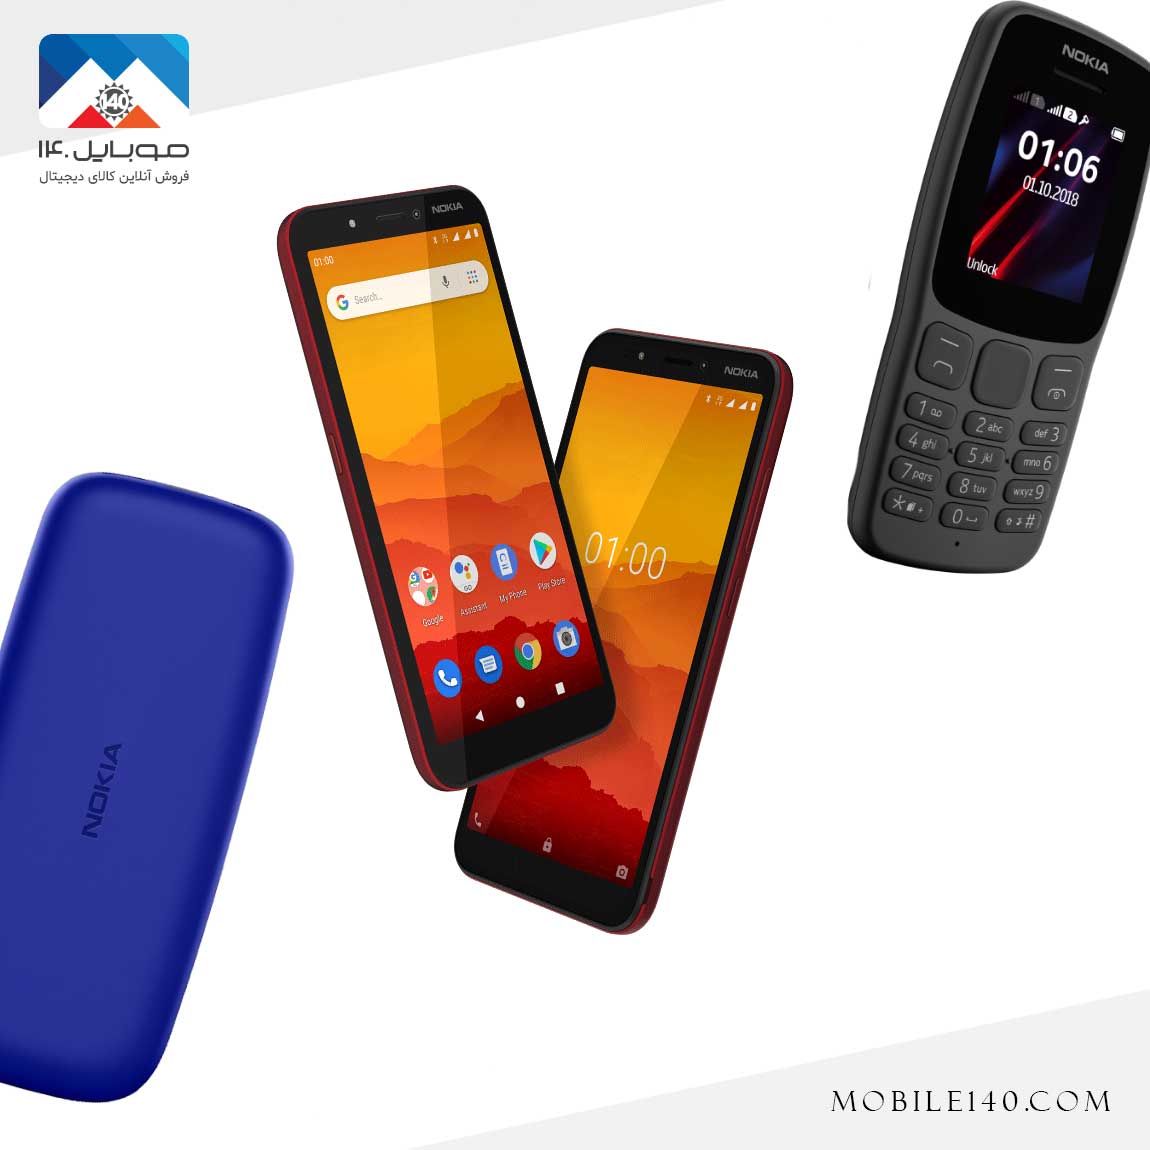 Nokia pack includes 5